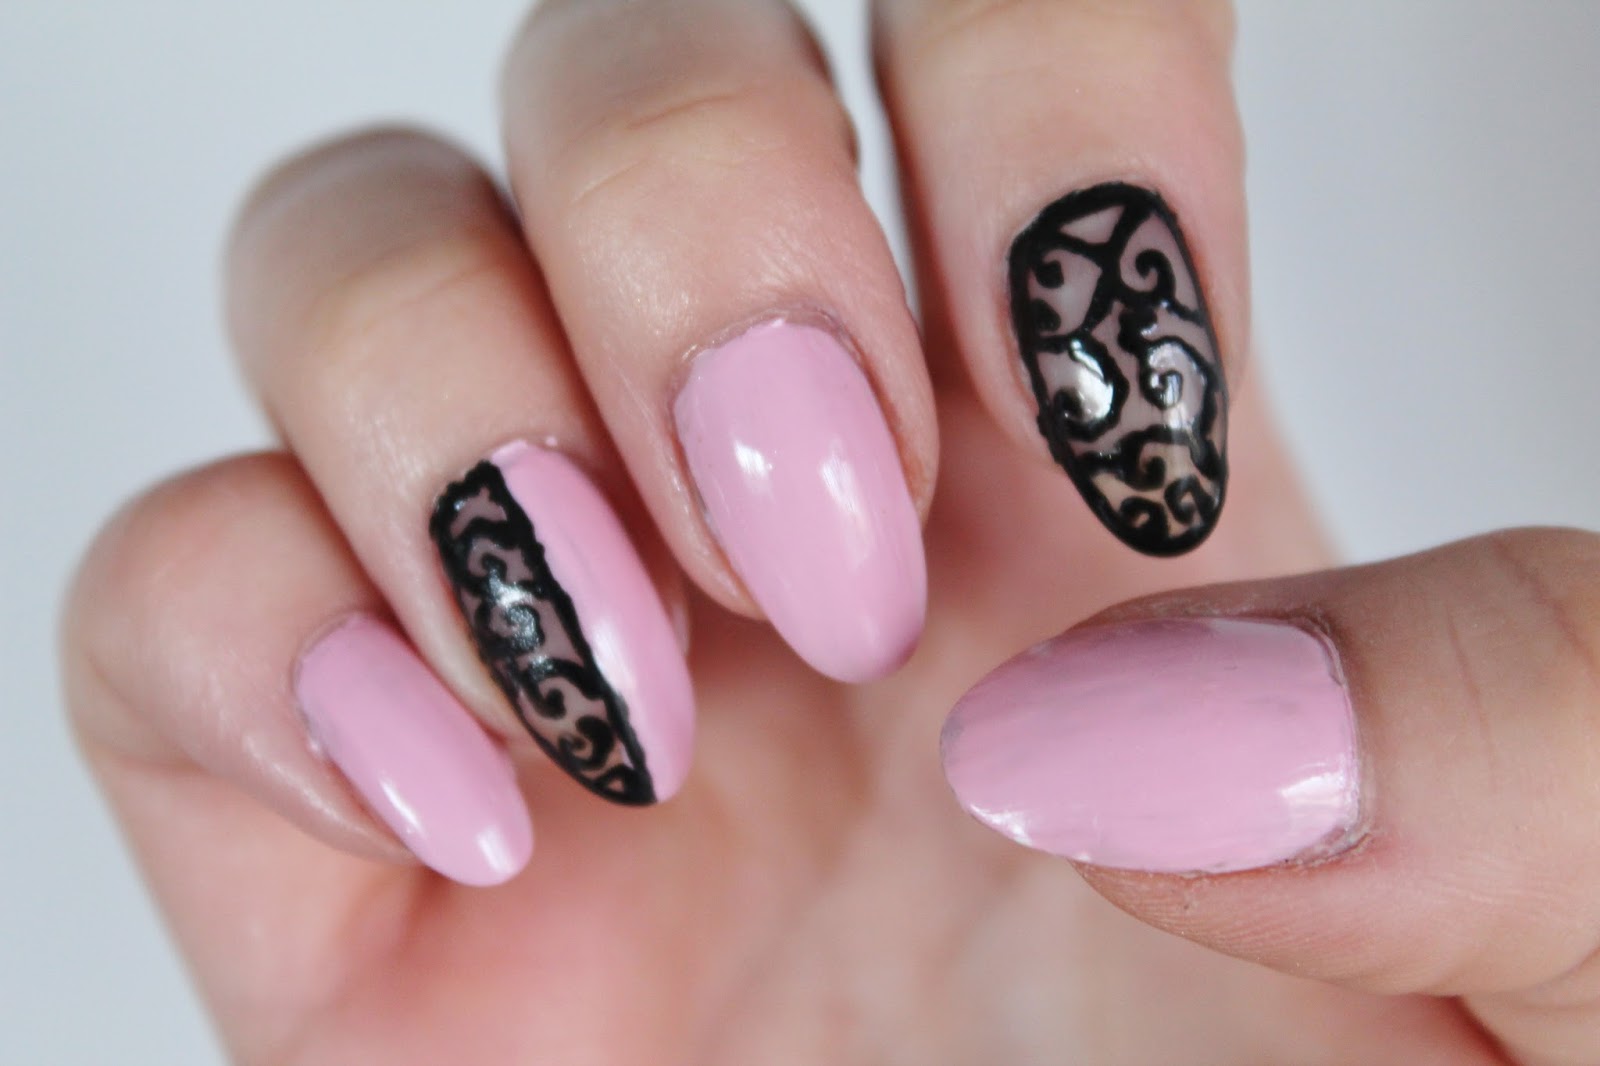 5. Negative Space Nail Art for Beginners - wide 3